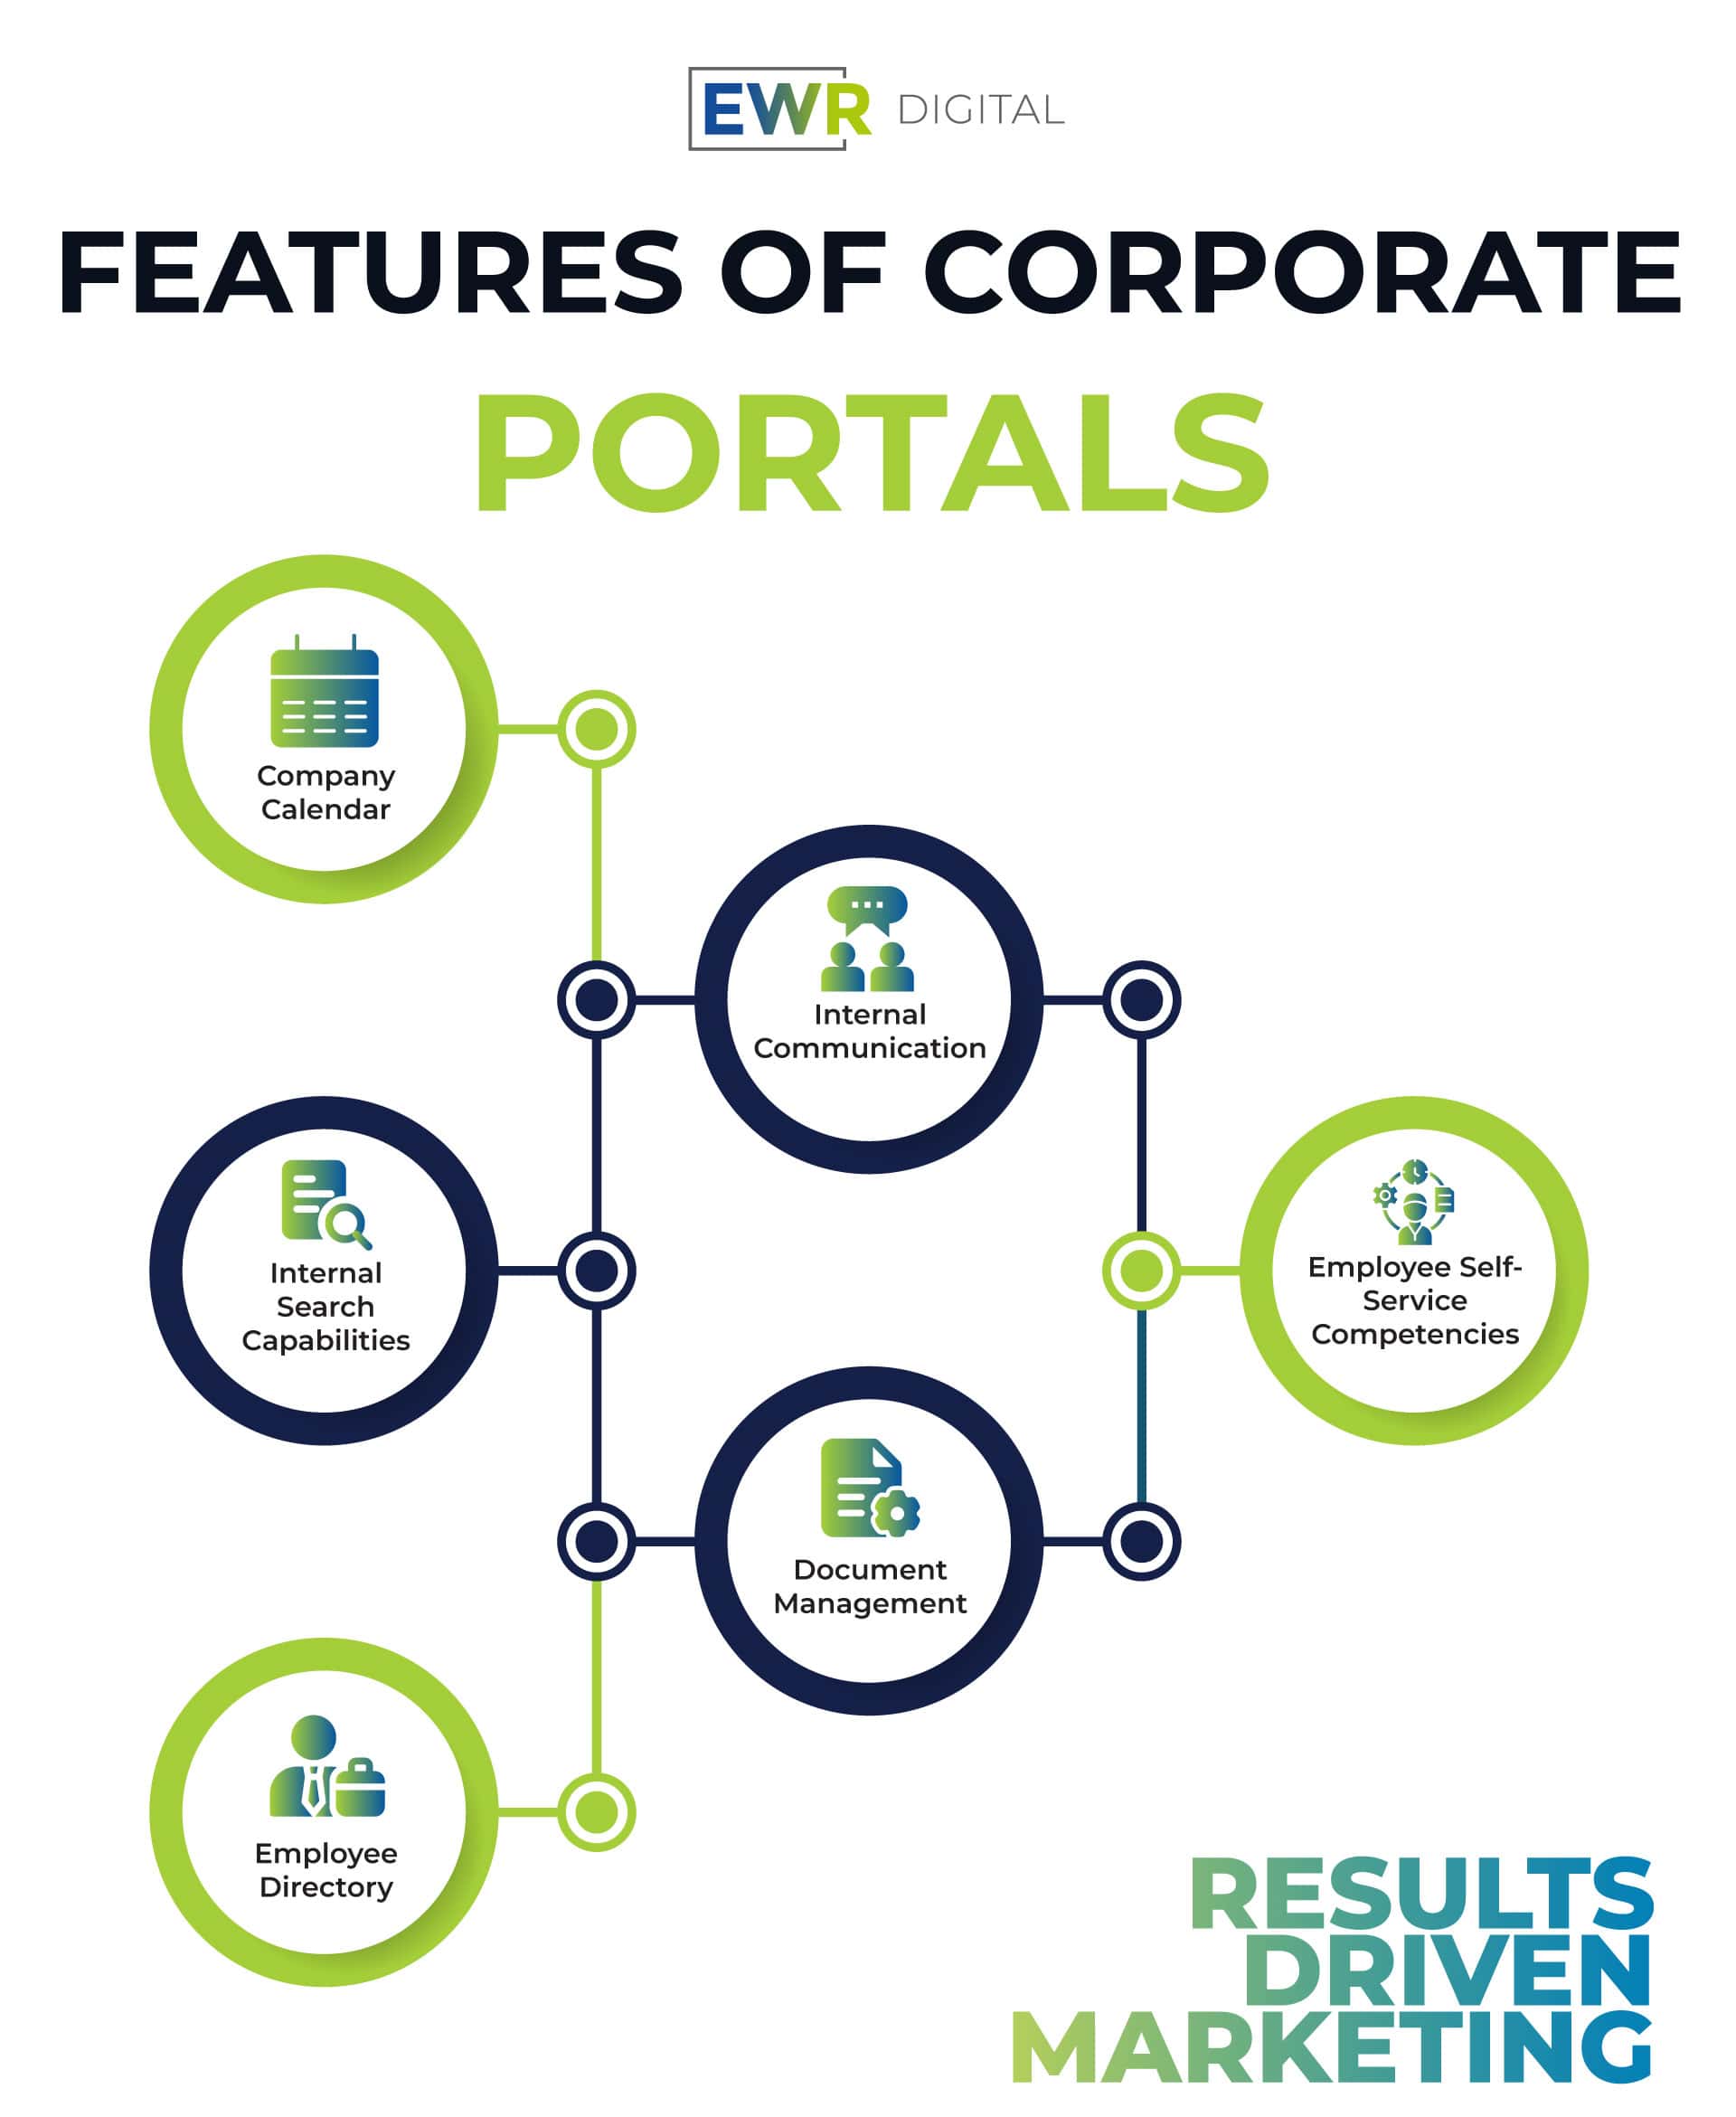 Features of Corporate Portals